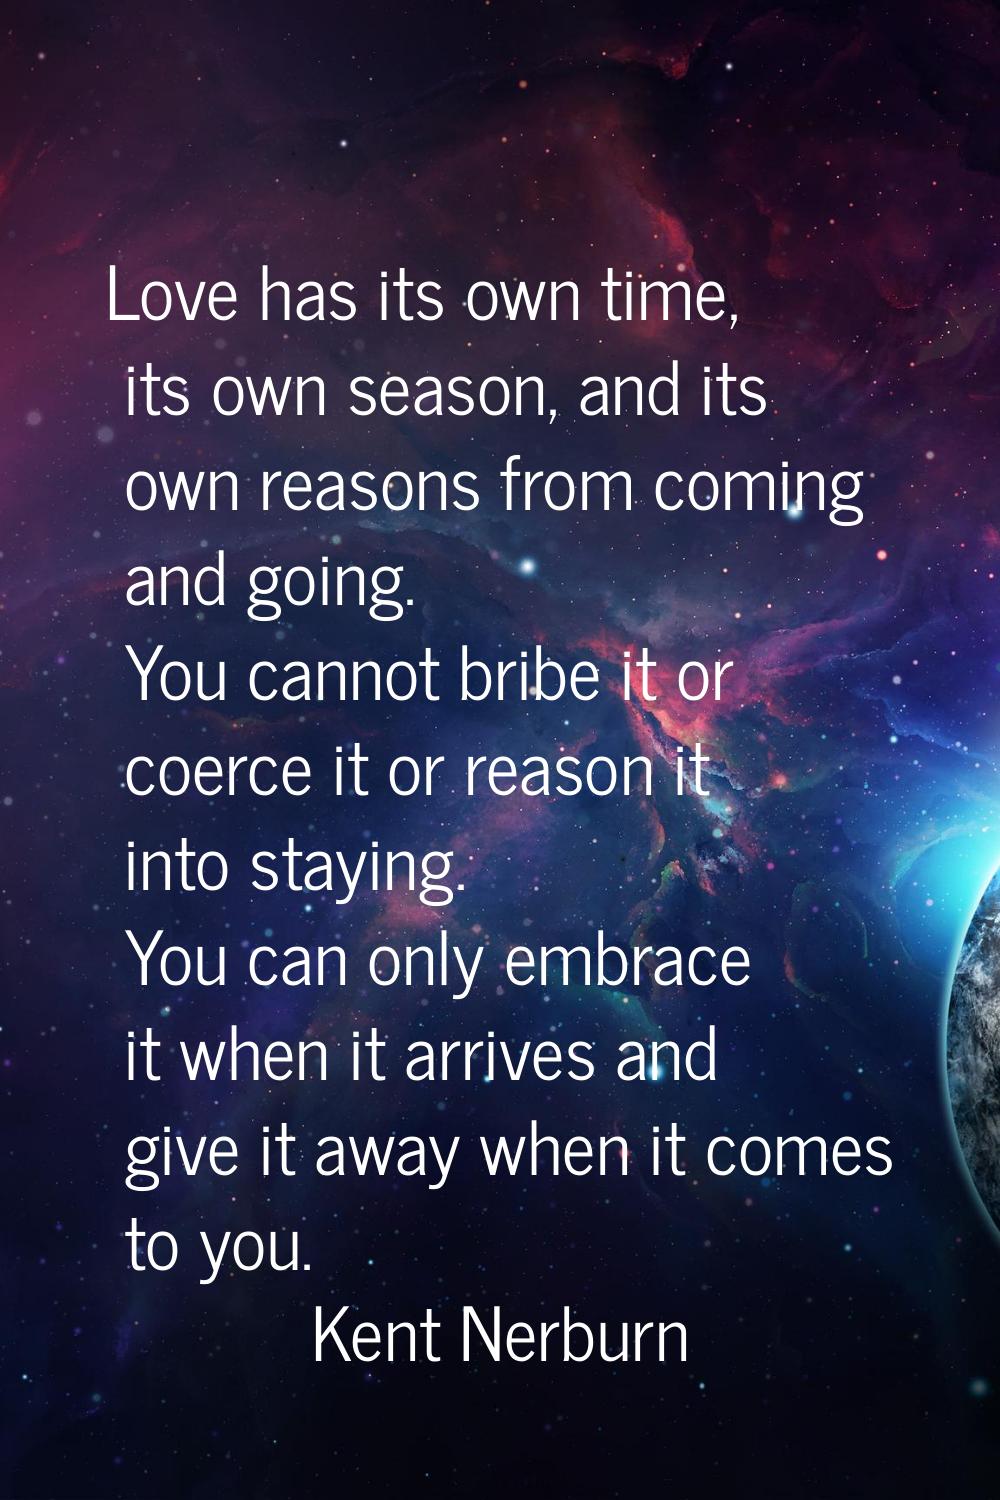 Love has its own time, its own season, and its own reasons from coming and going. You cannot bribe 